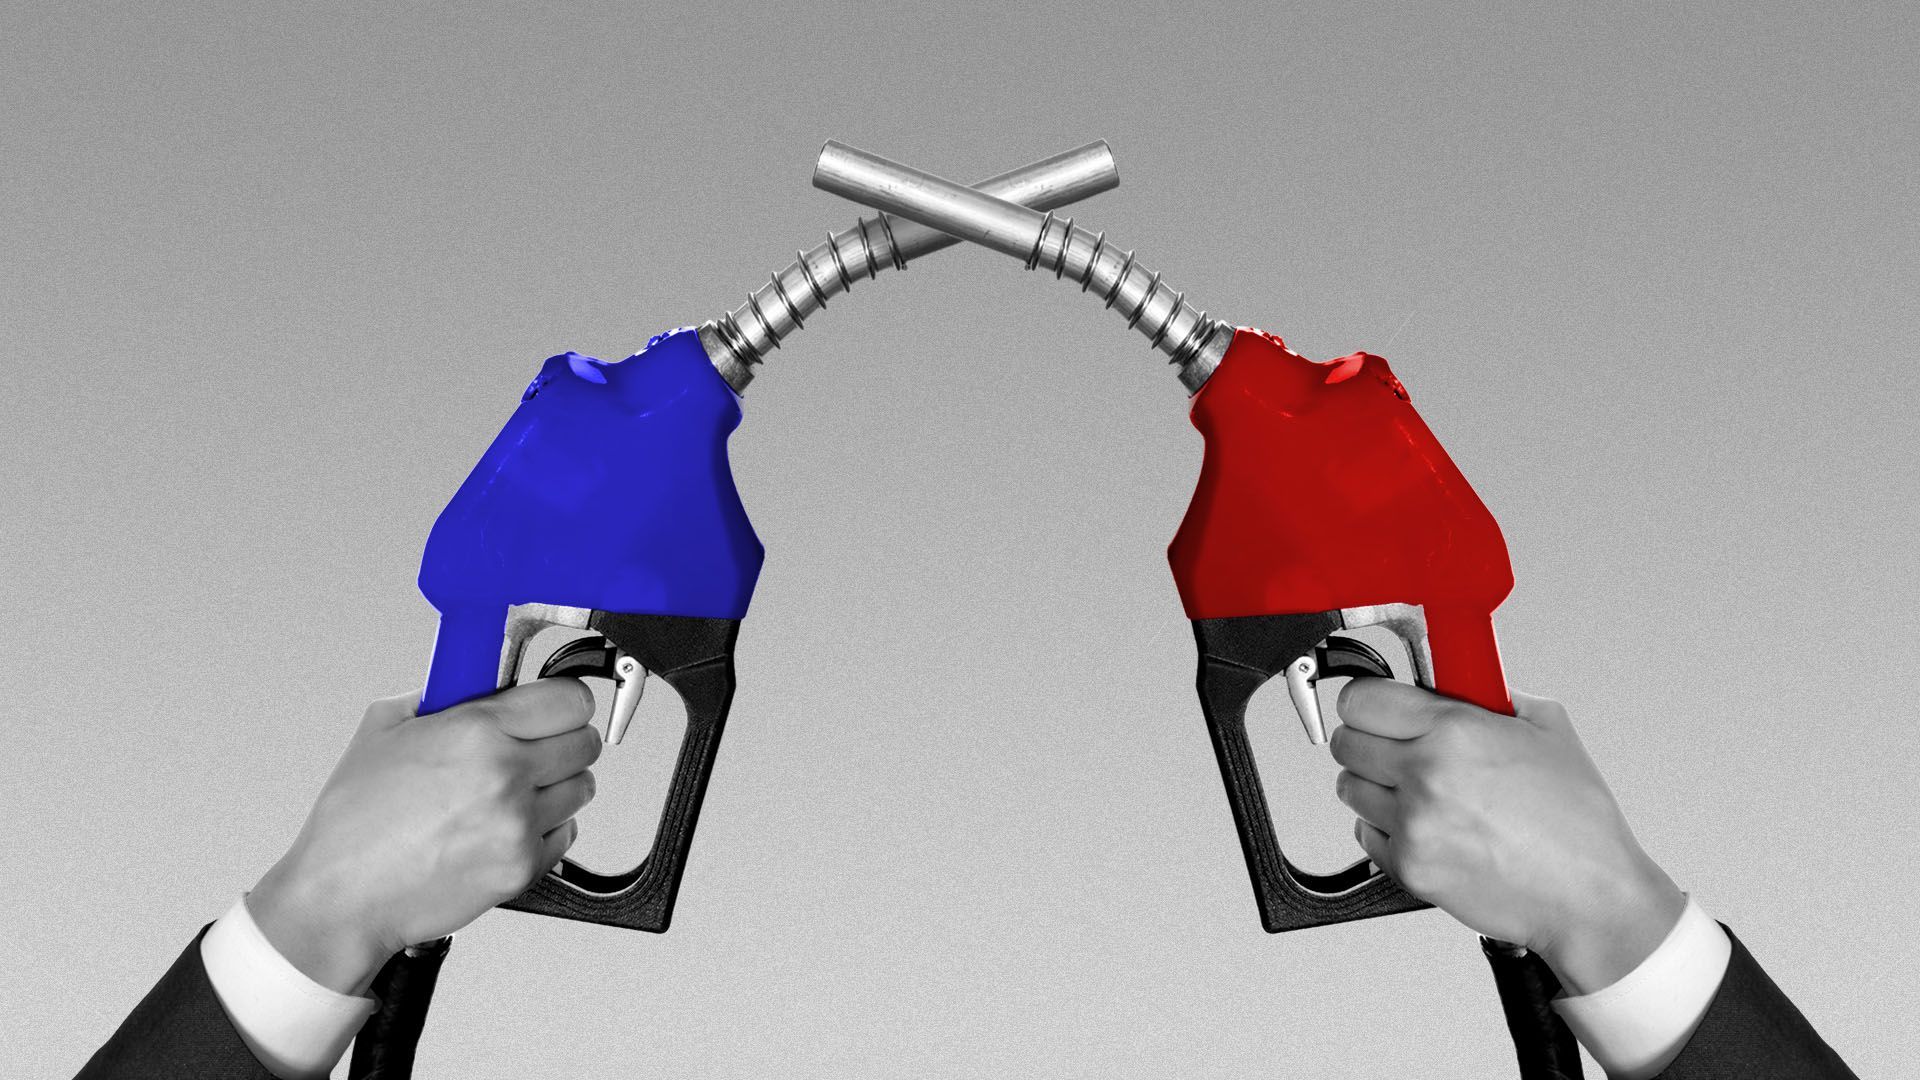 Illustration of two hands in business suits holding different colored gas pumps nozzels